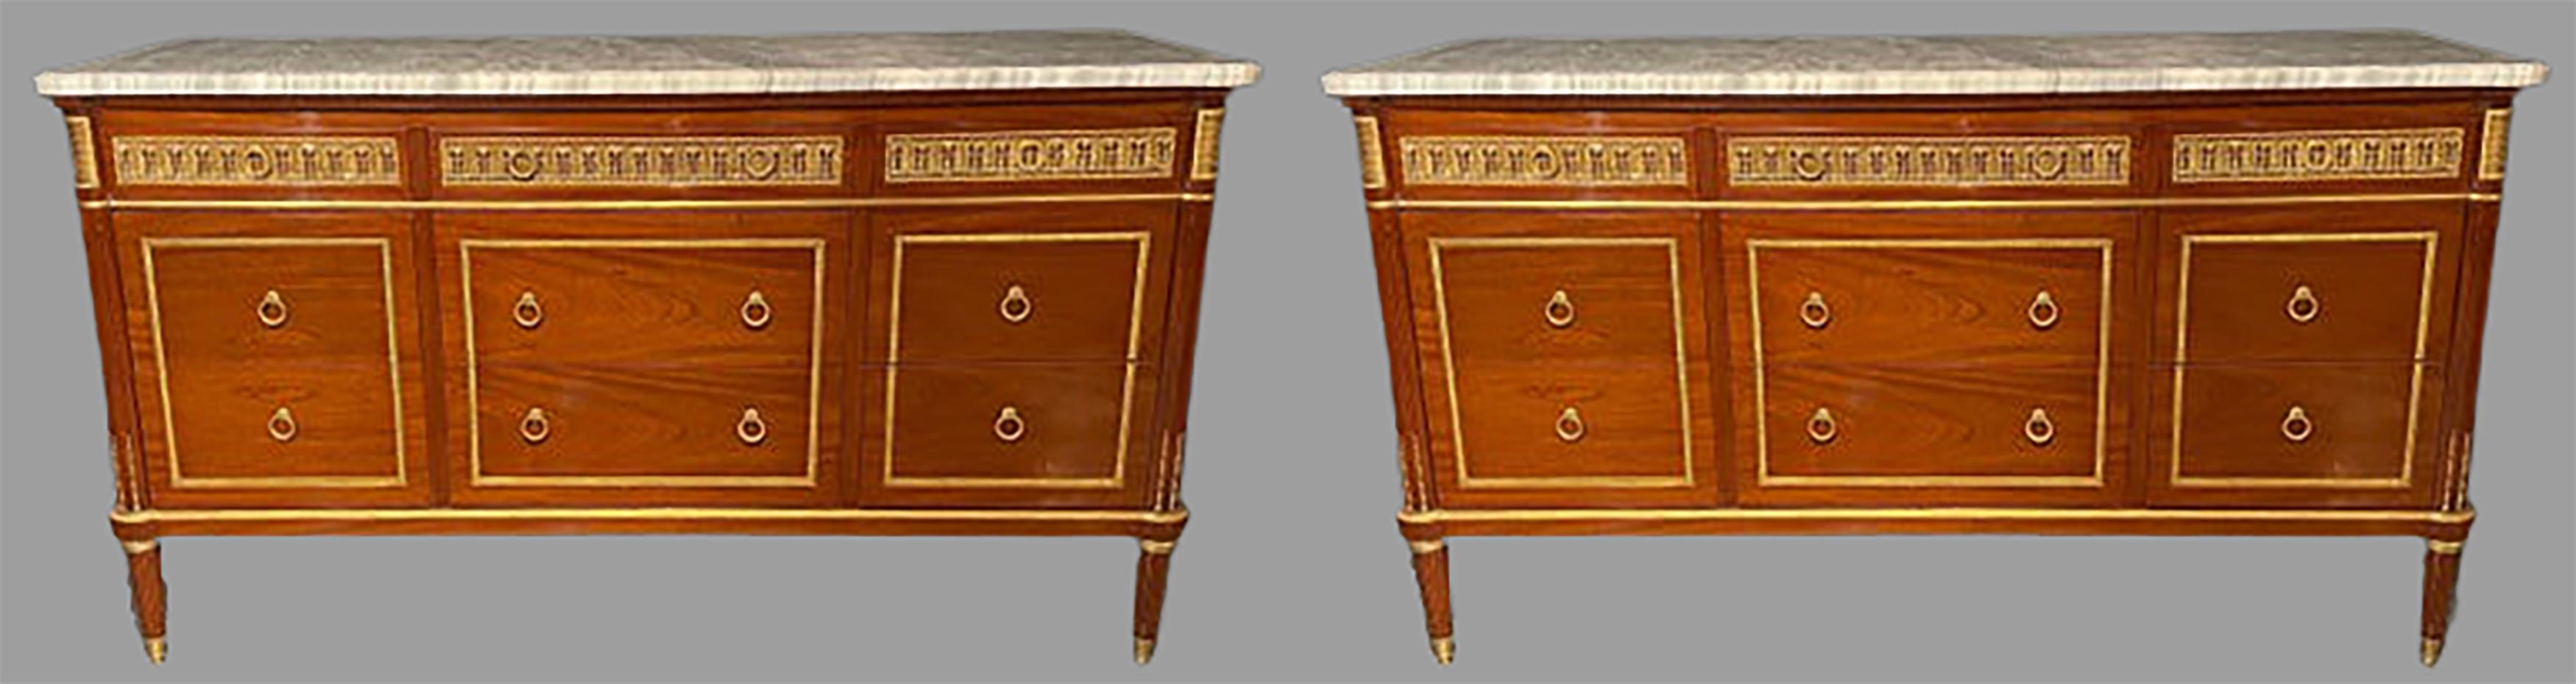 Louis XVI Pair of Monumental French Commodes in the Manner of Maison Jansen For Sale